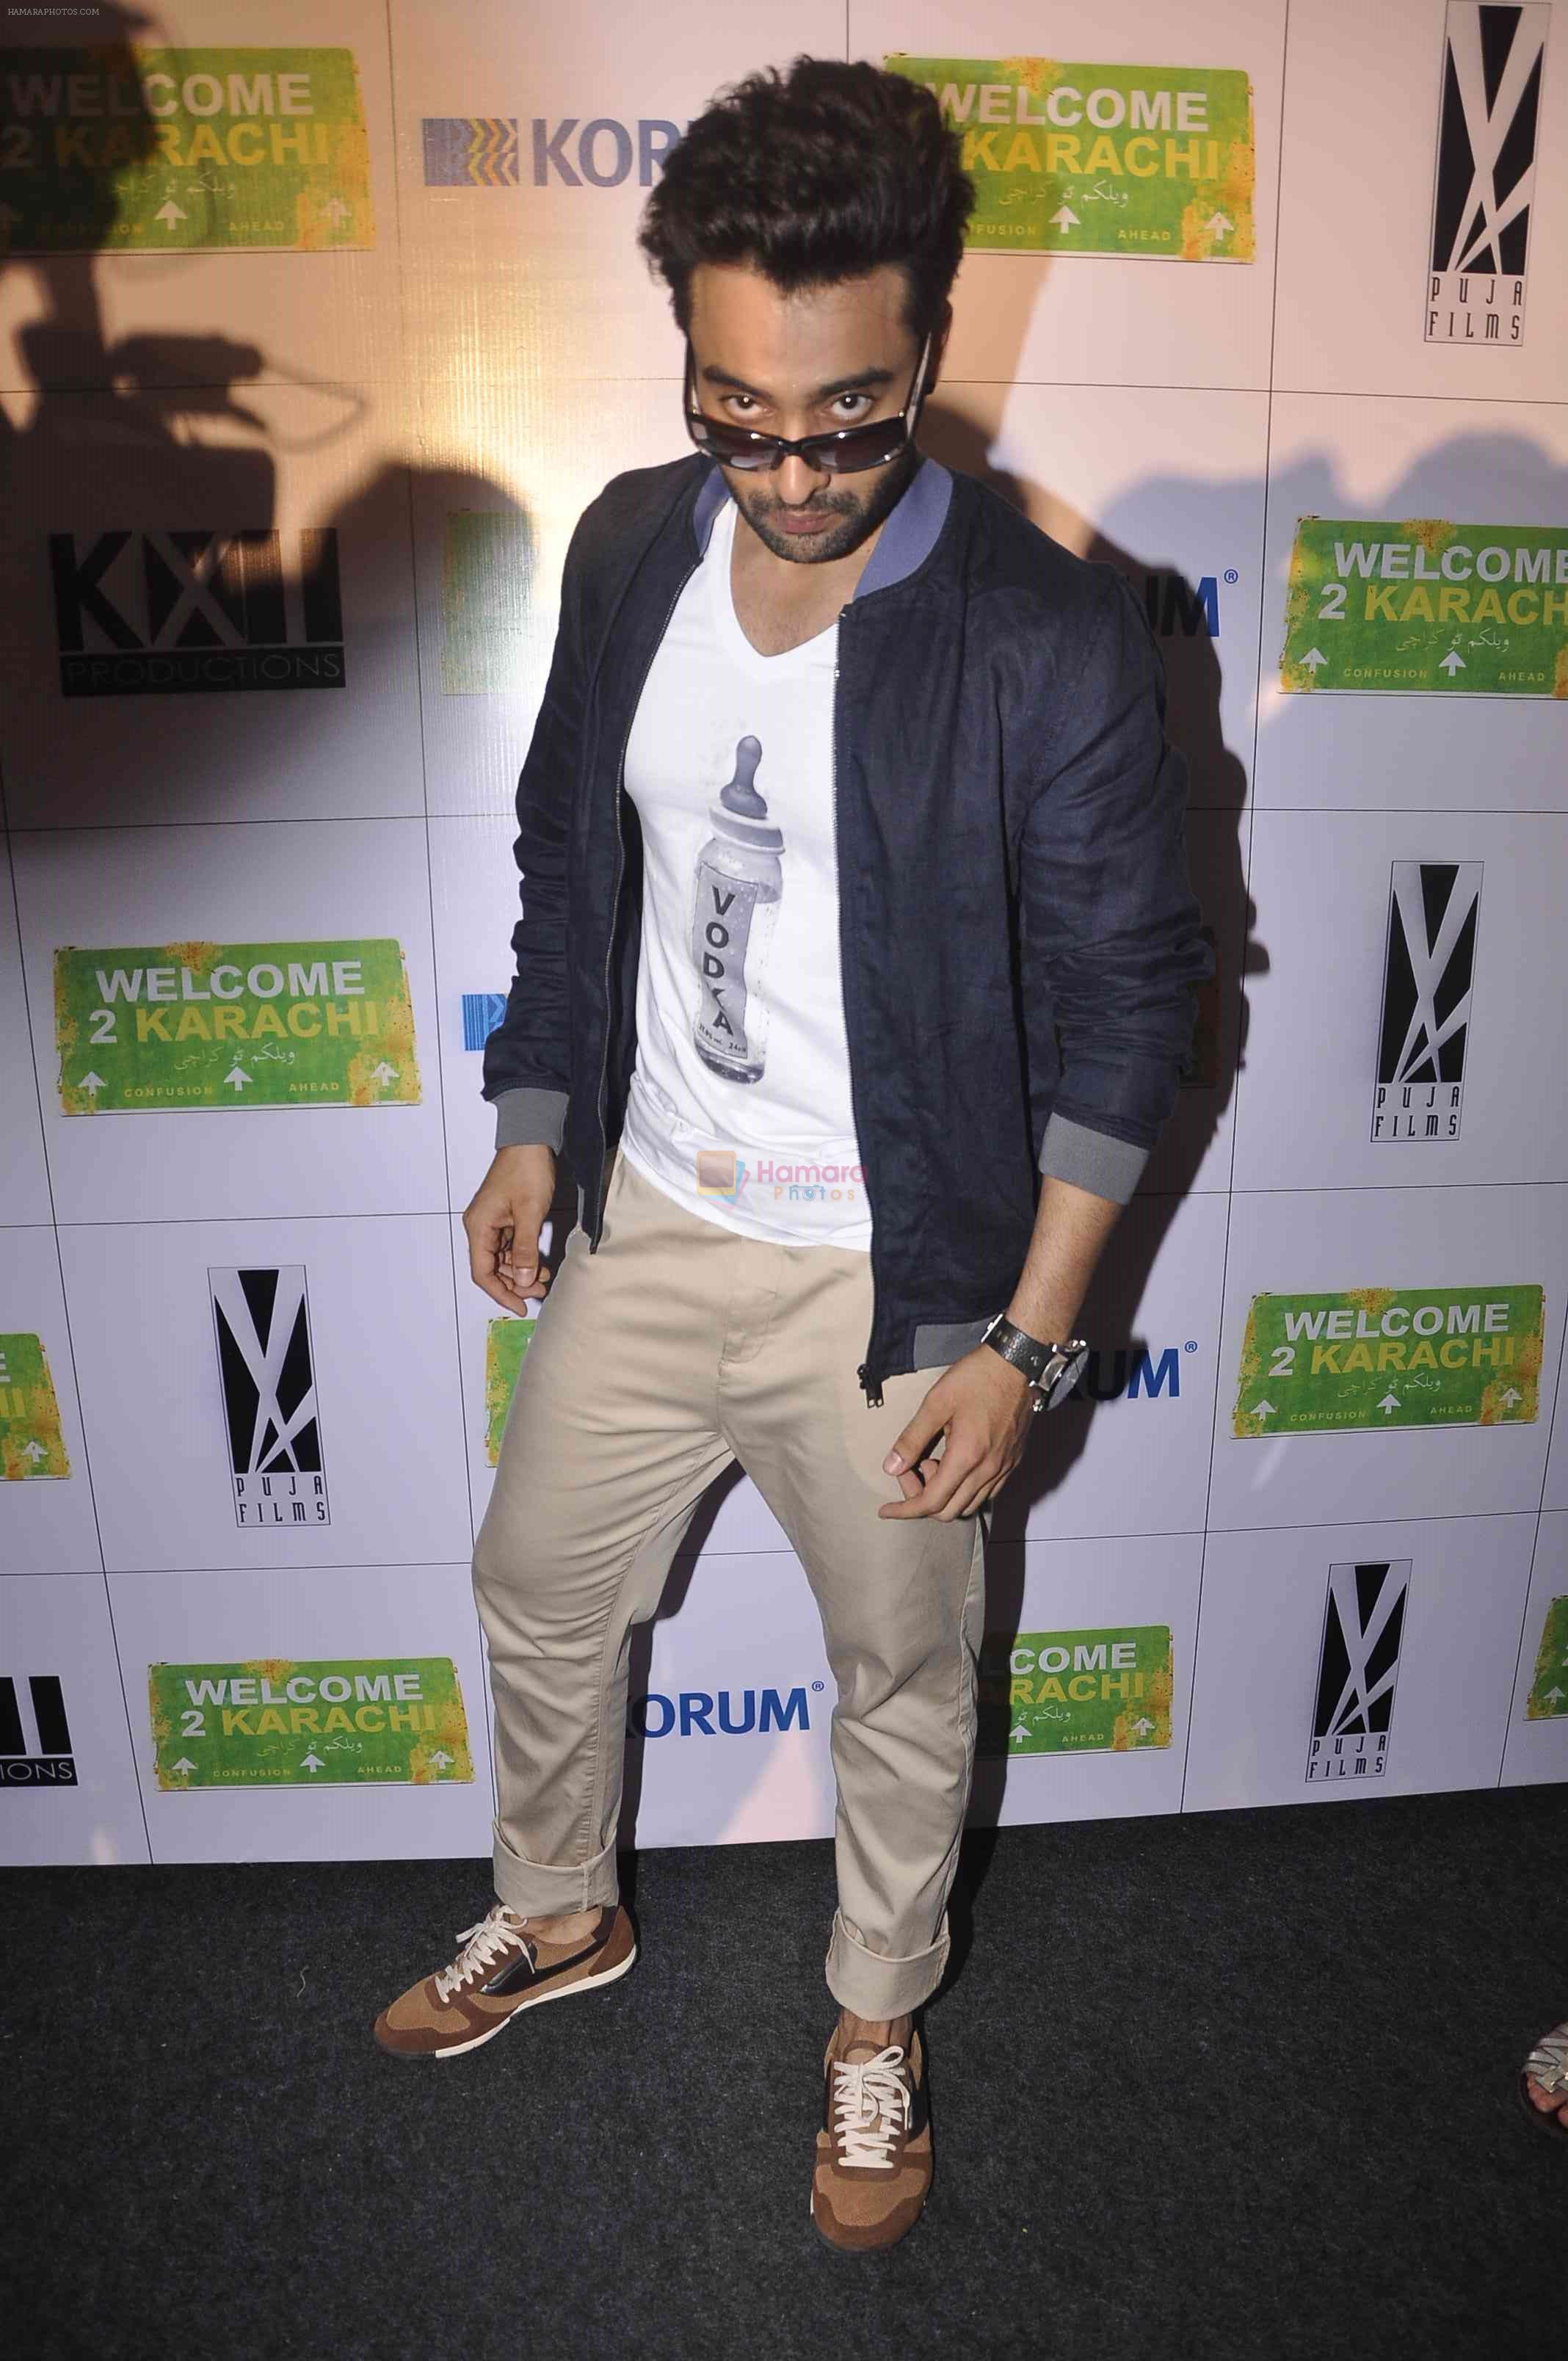 Jackky Bhagnani at promotions for welcome to karachi in thane on 2nd May 2015